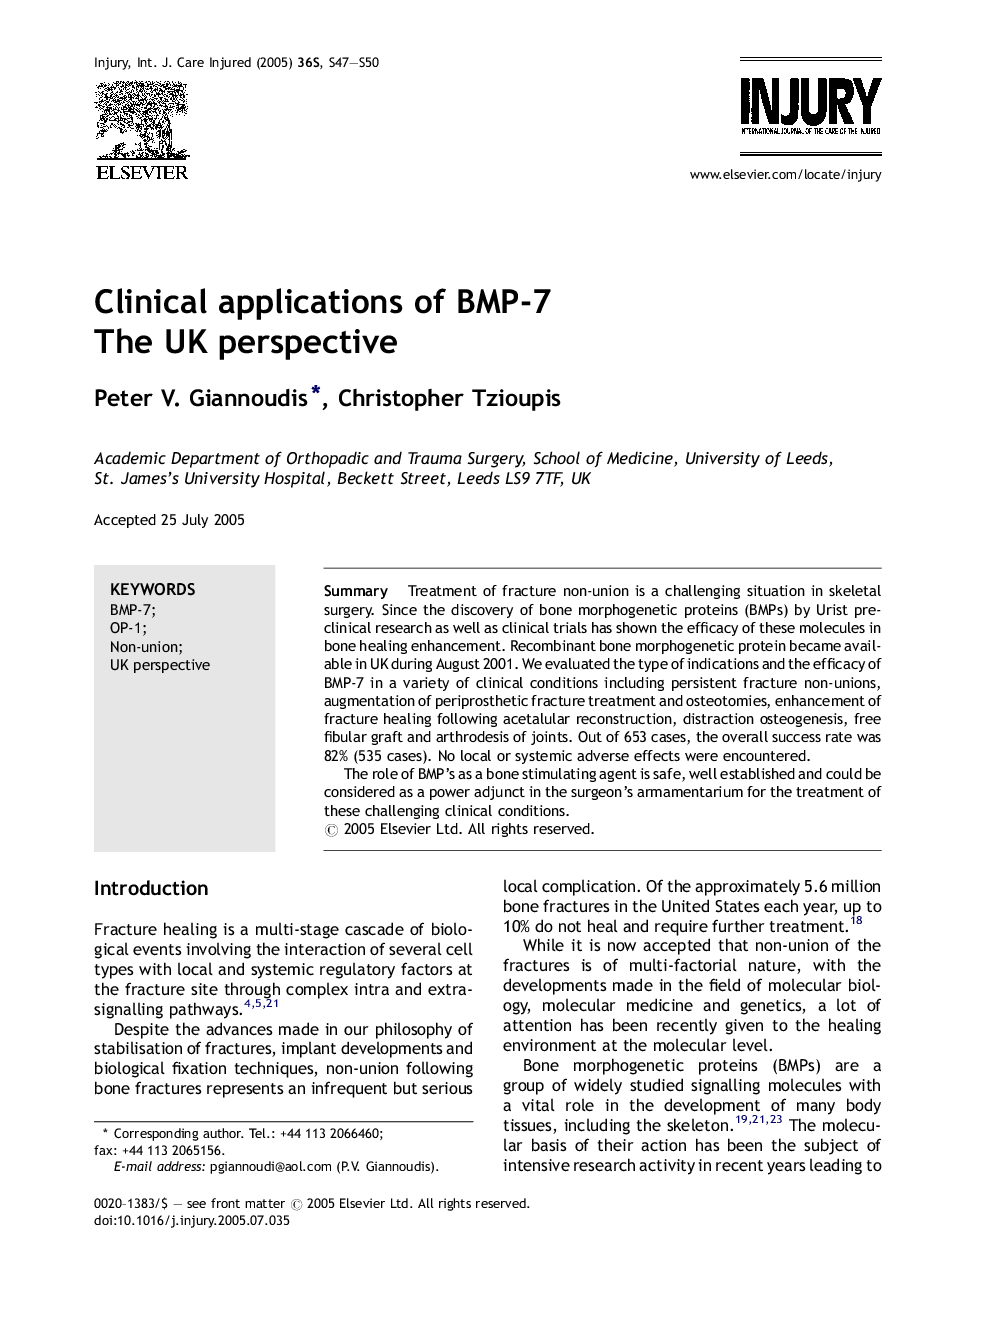 Clinical applications of BMP-7